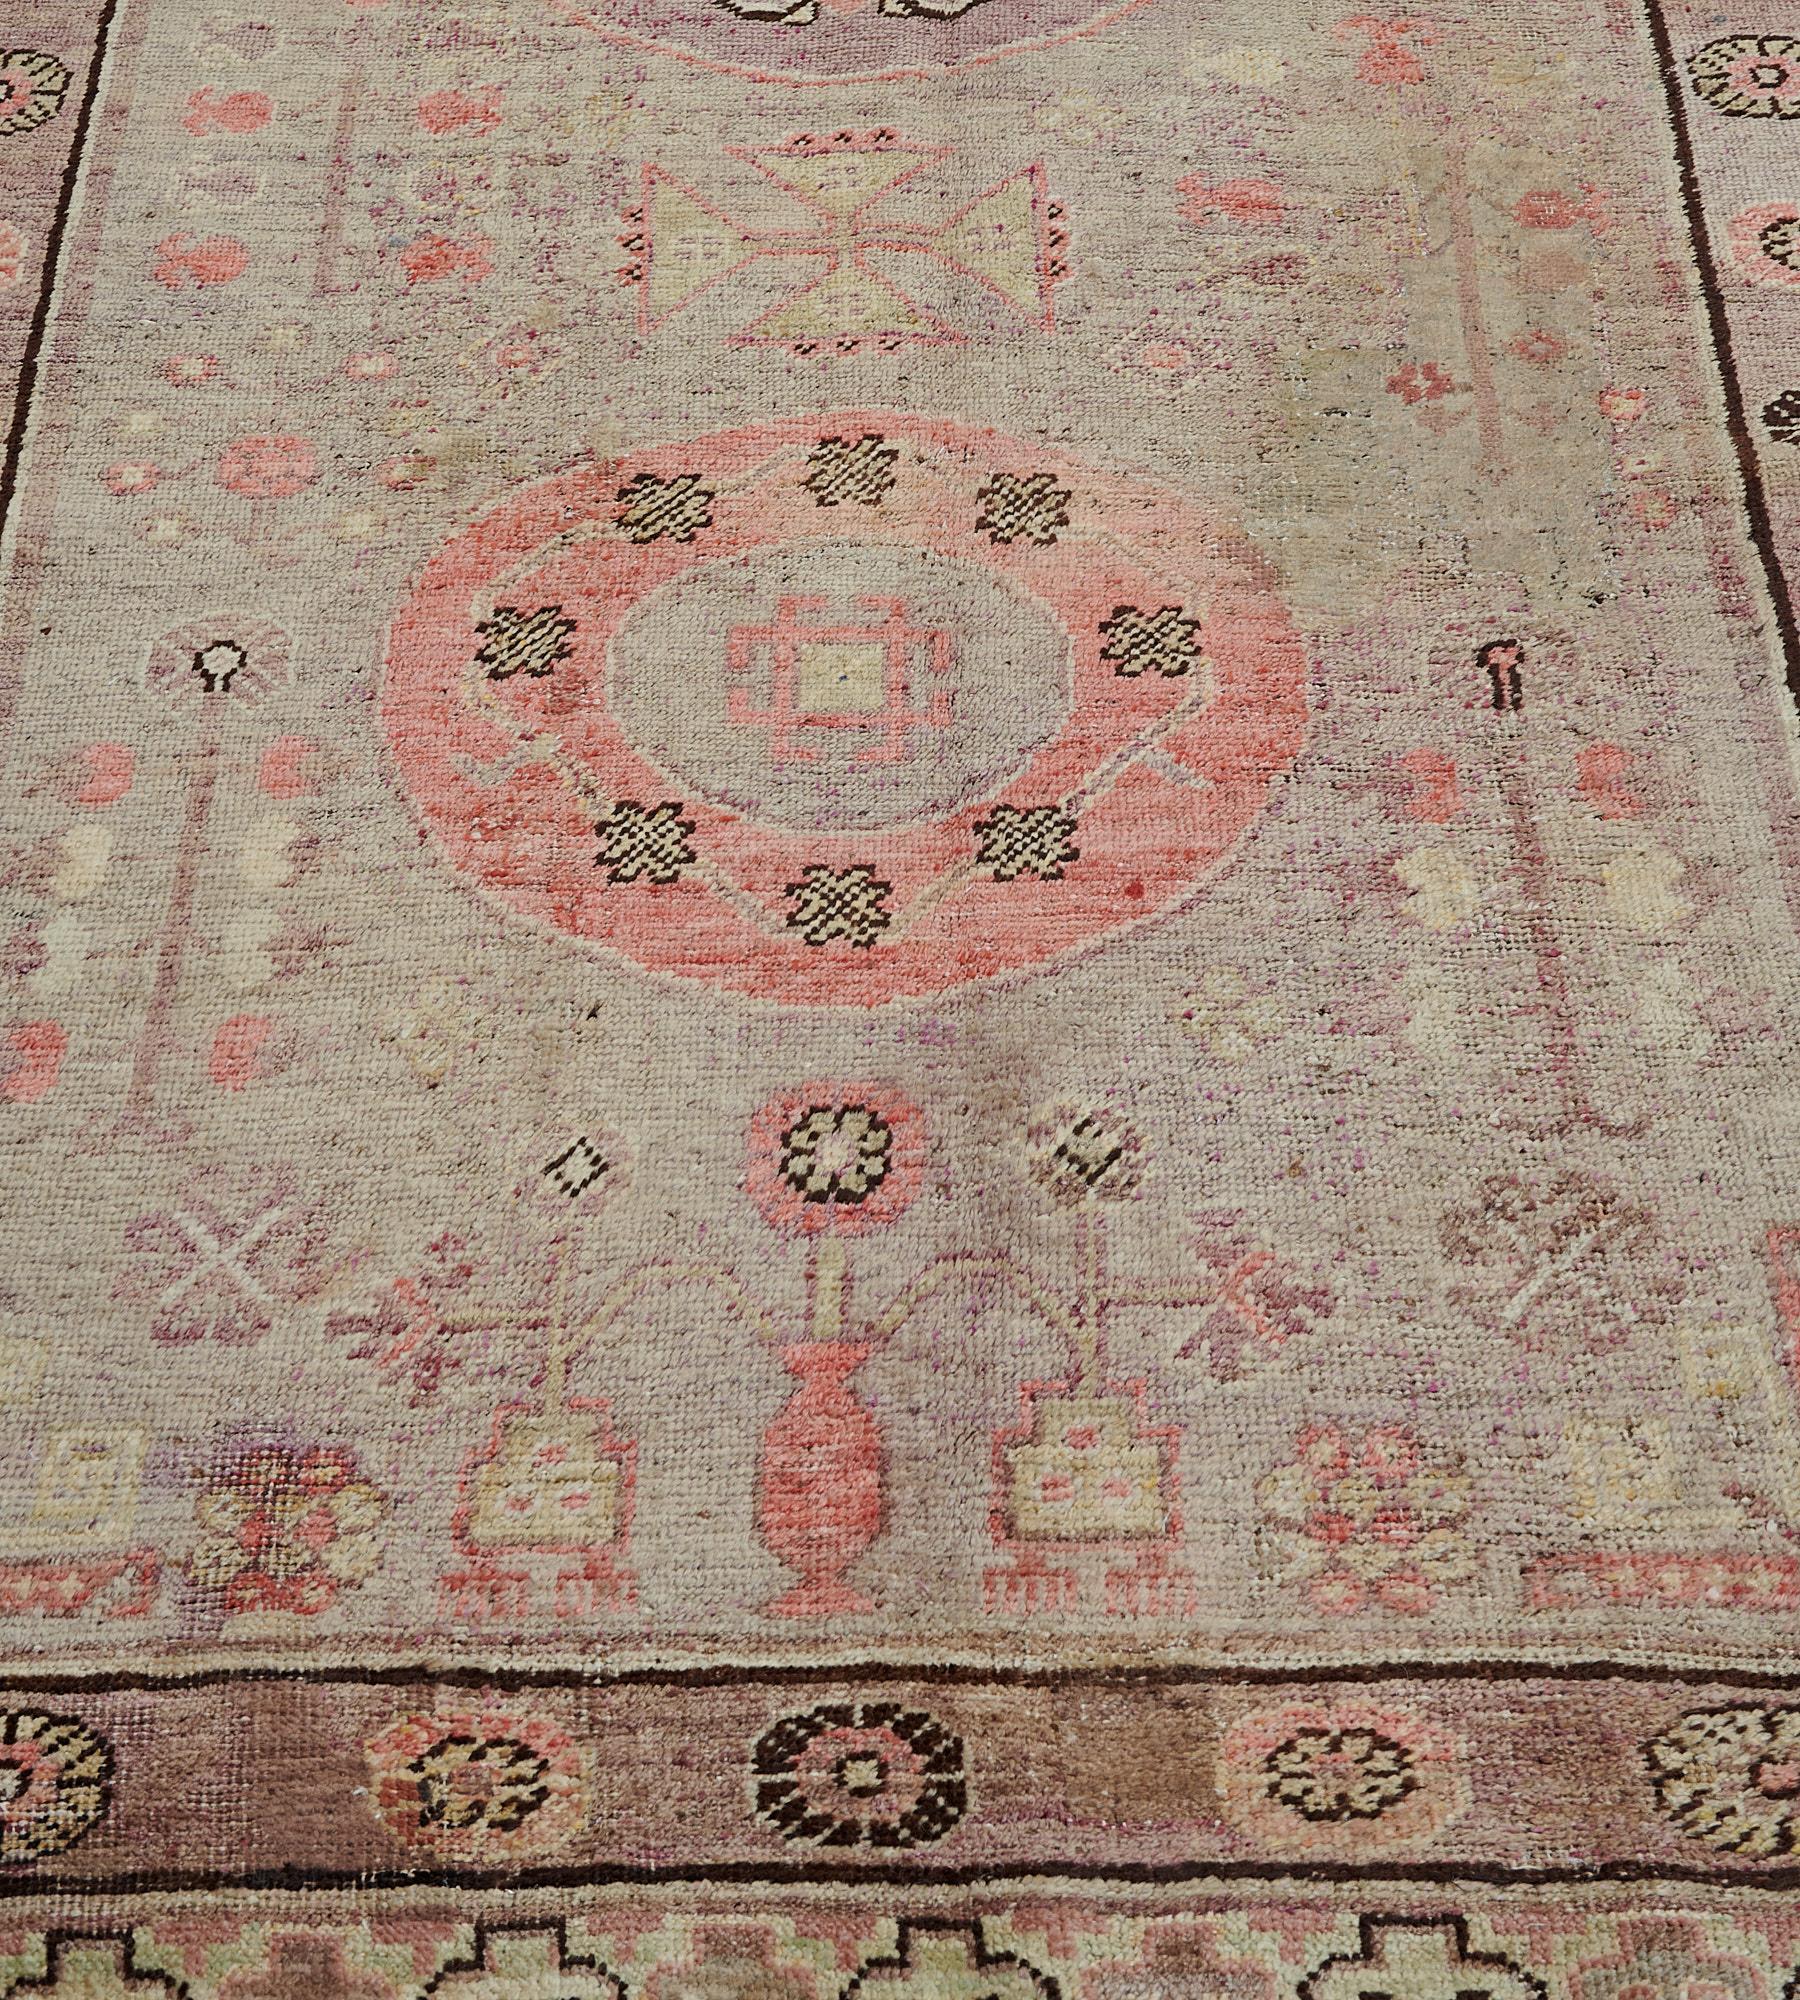 This antique Khotan rug has a soft-grey field around a column of three roundels, the central aubergine-purple with a hooked floral motif and the outer two with a coral-pink band of linked flowerheads around a central small circle containing an